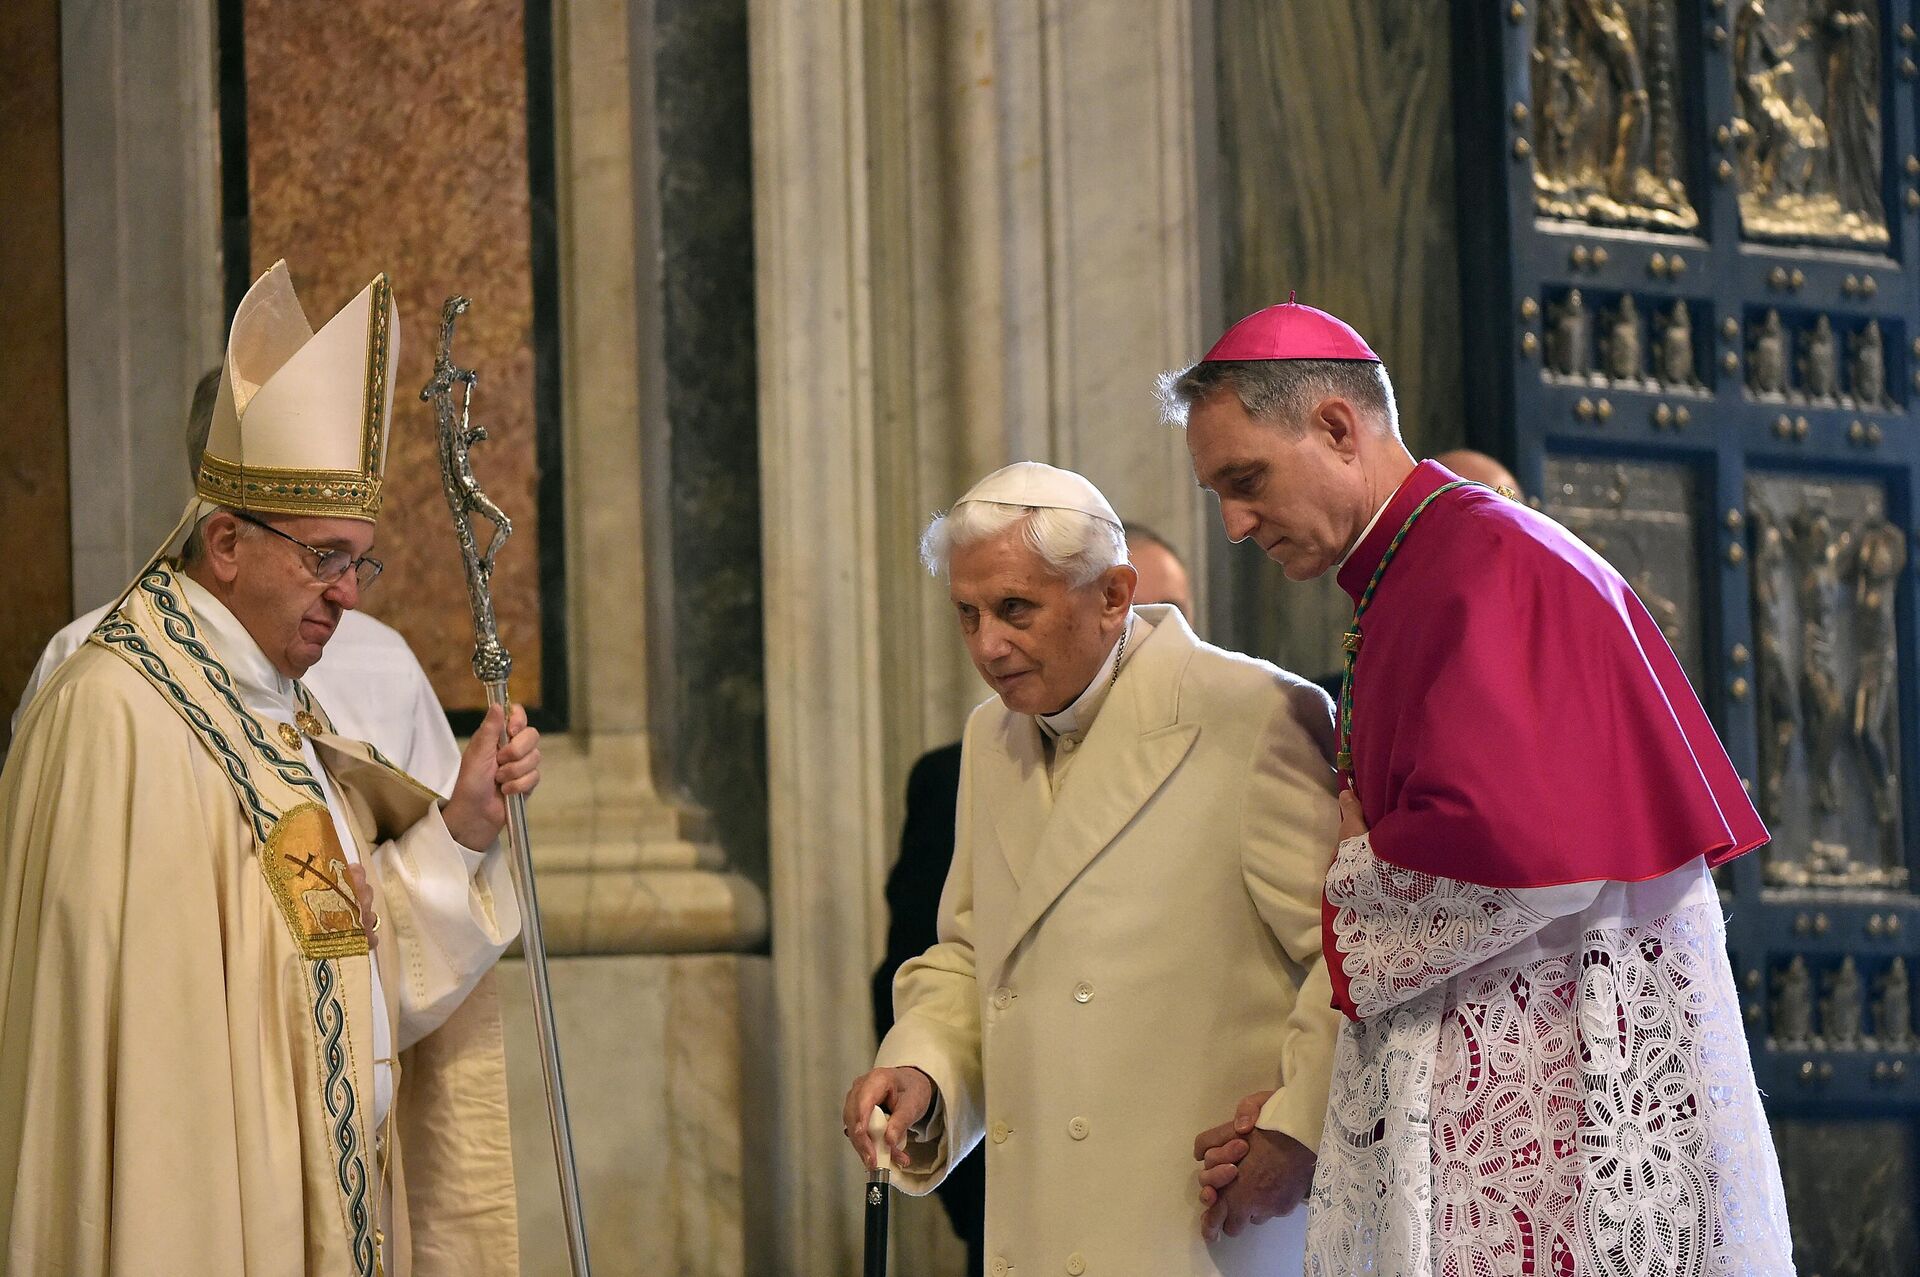 Pope Emeritus Benedict XVI (C) is helped by the prefect of the papal household Georg Gaenswein (R) to pass the Holy Door as Pope Francis (L) looks on, on December 8, 2015 in Vatican. - Sputnik International, 1920, 31.12.2022